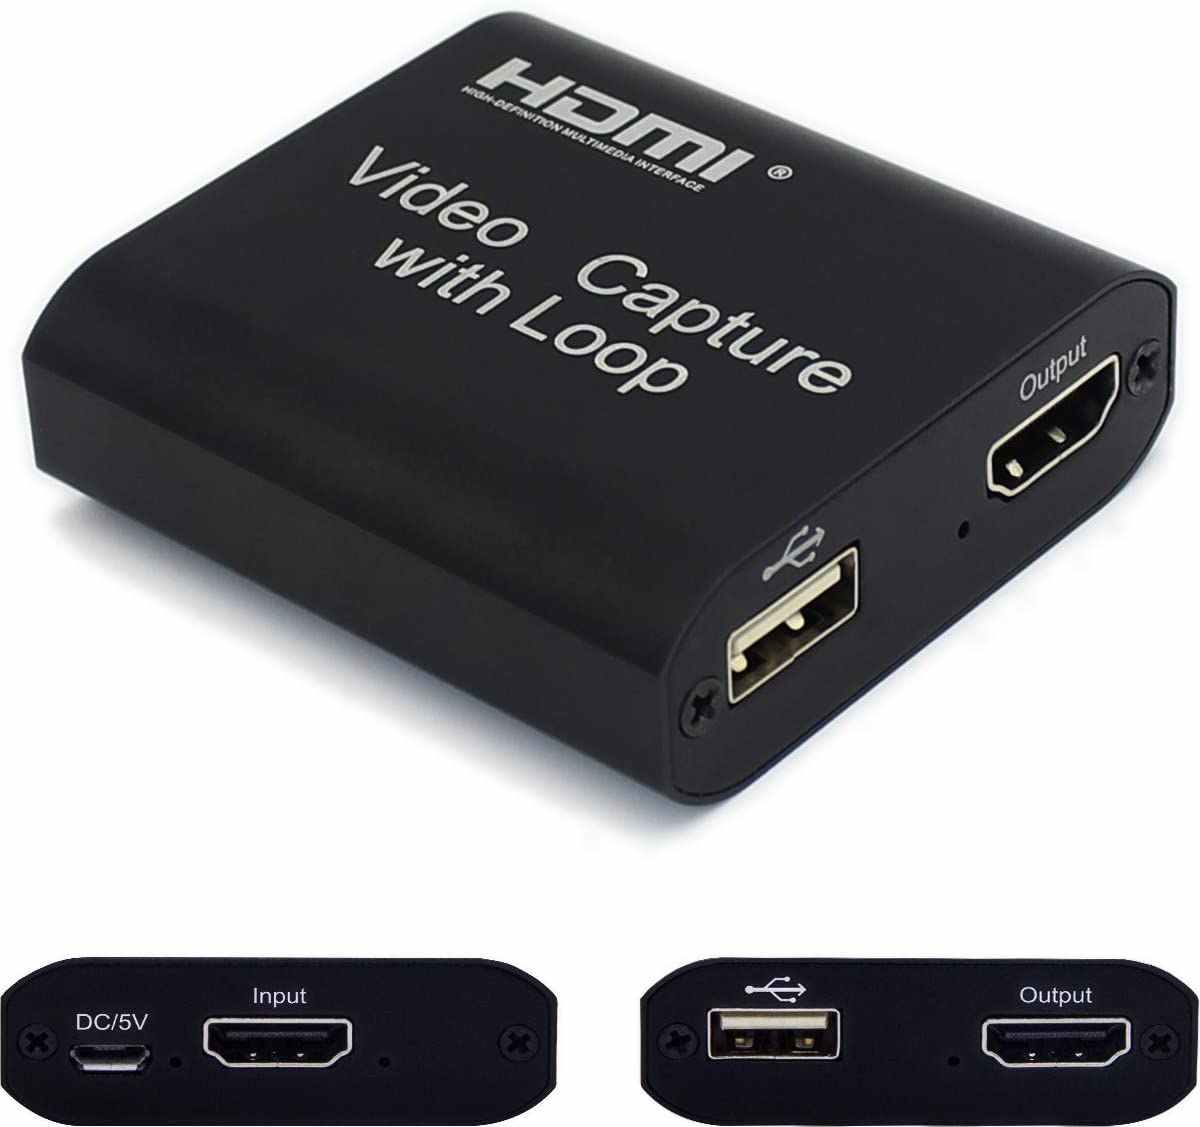 4k Audio Video Capture Card with Loop Out HDMI To HDMI USB 2.0 for Phone PS4 Game Live Video Streaming Record